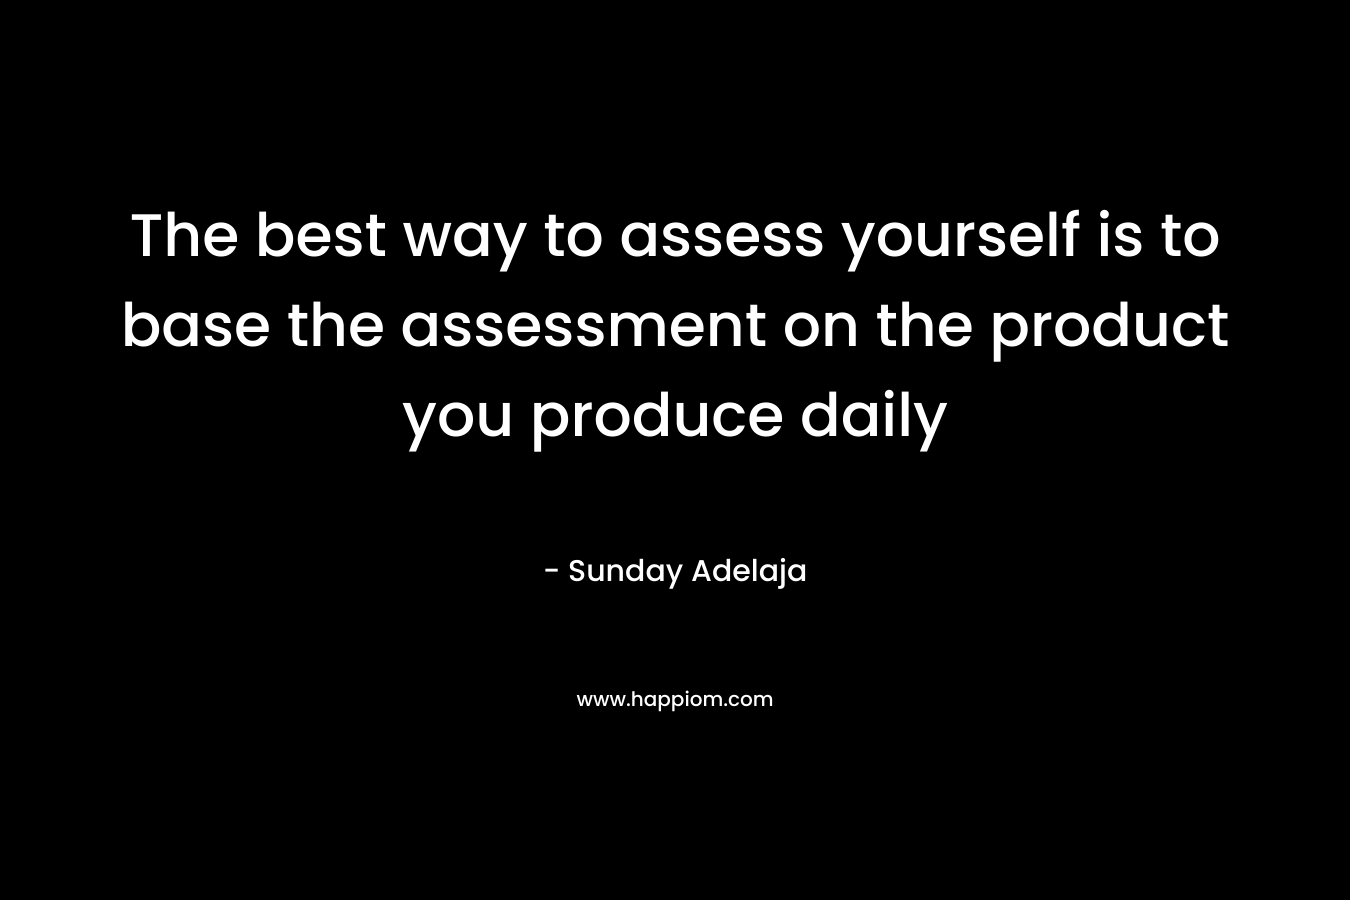 The best way to assess yourself is to base the assessment on the product you produce daily – Sunday Adelaja